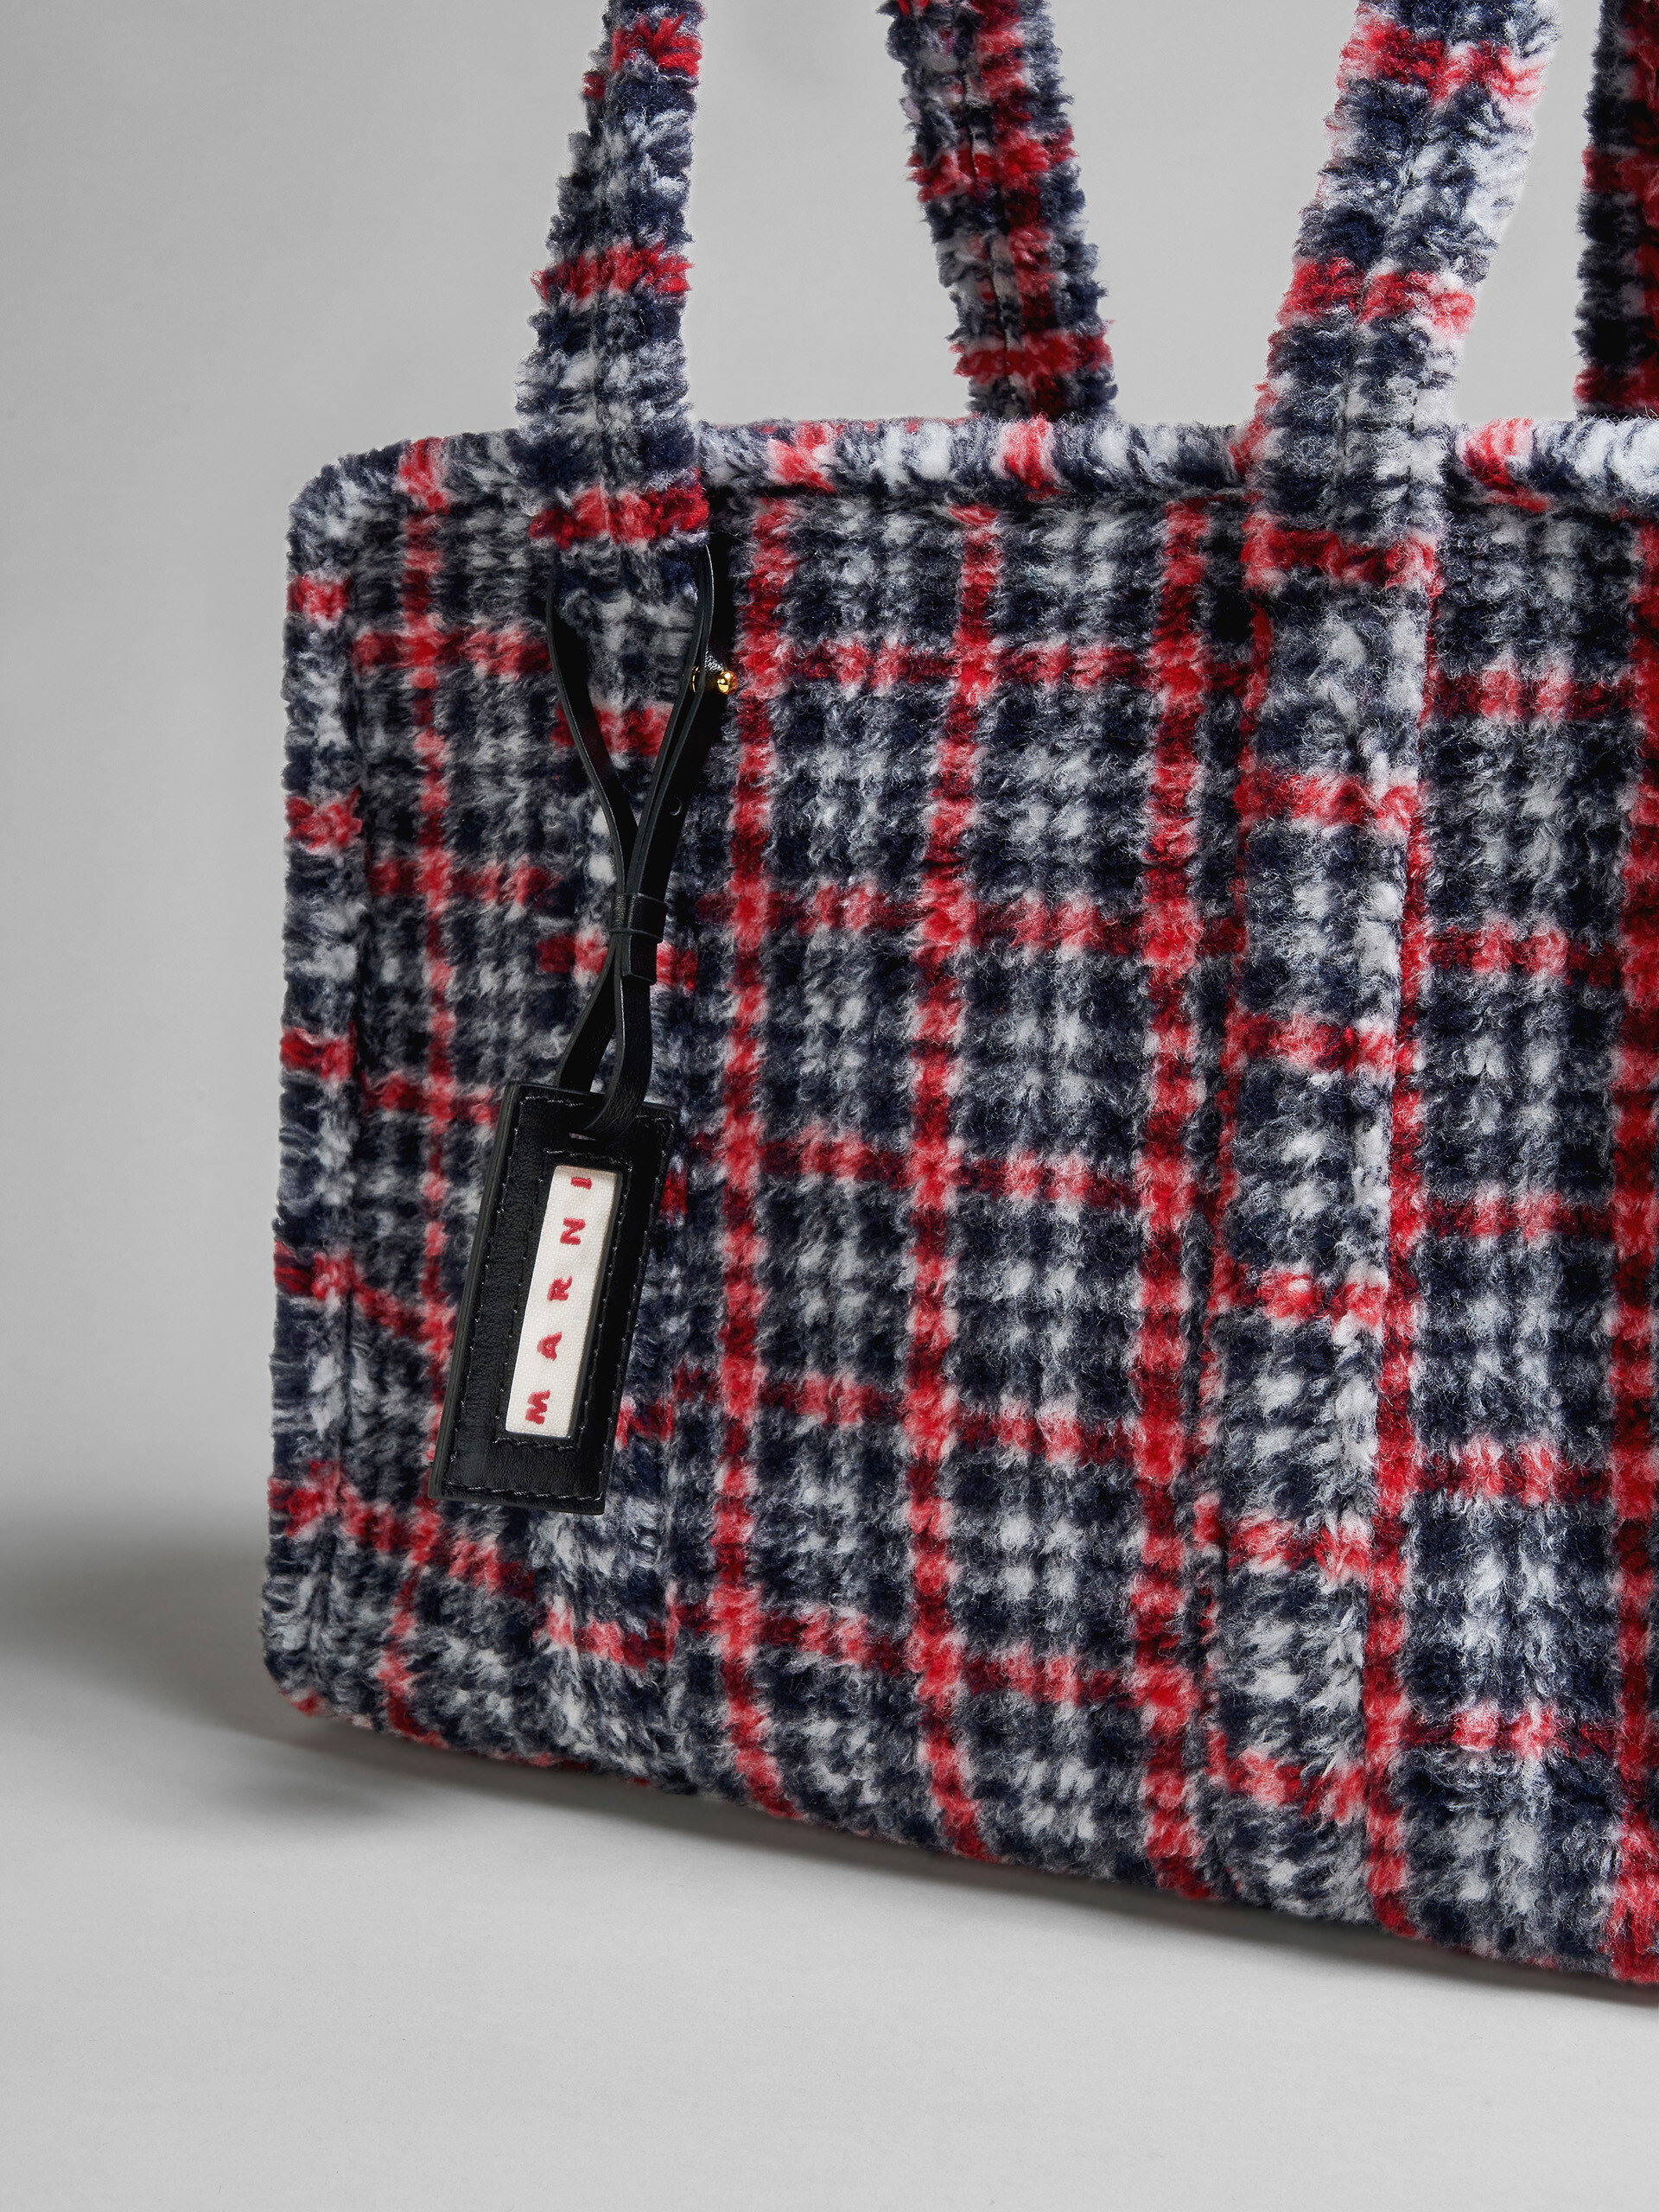 Small travel bag in check fabric - Shopping Bags - Image 5